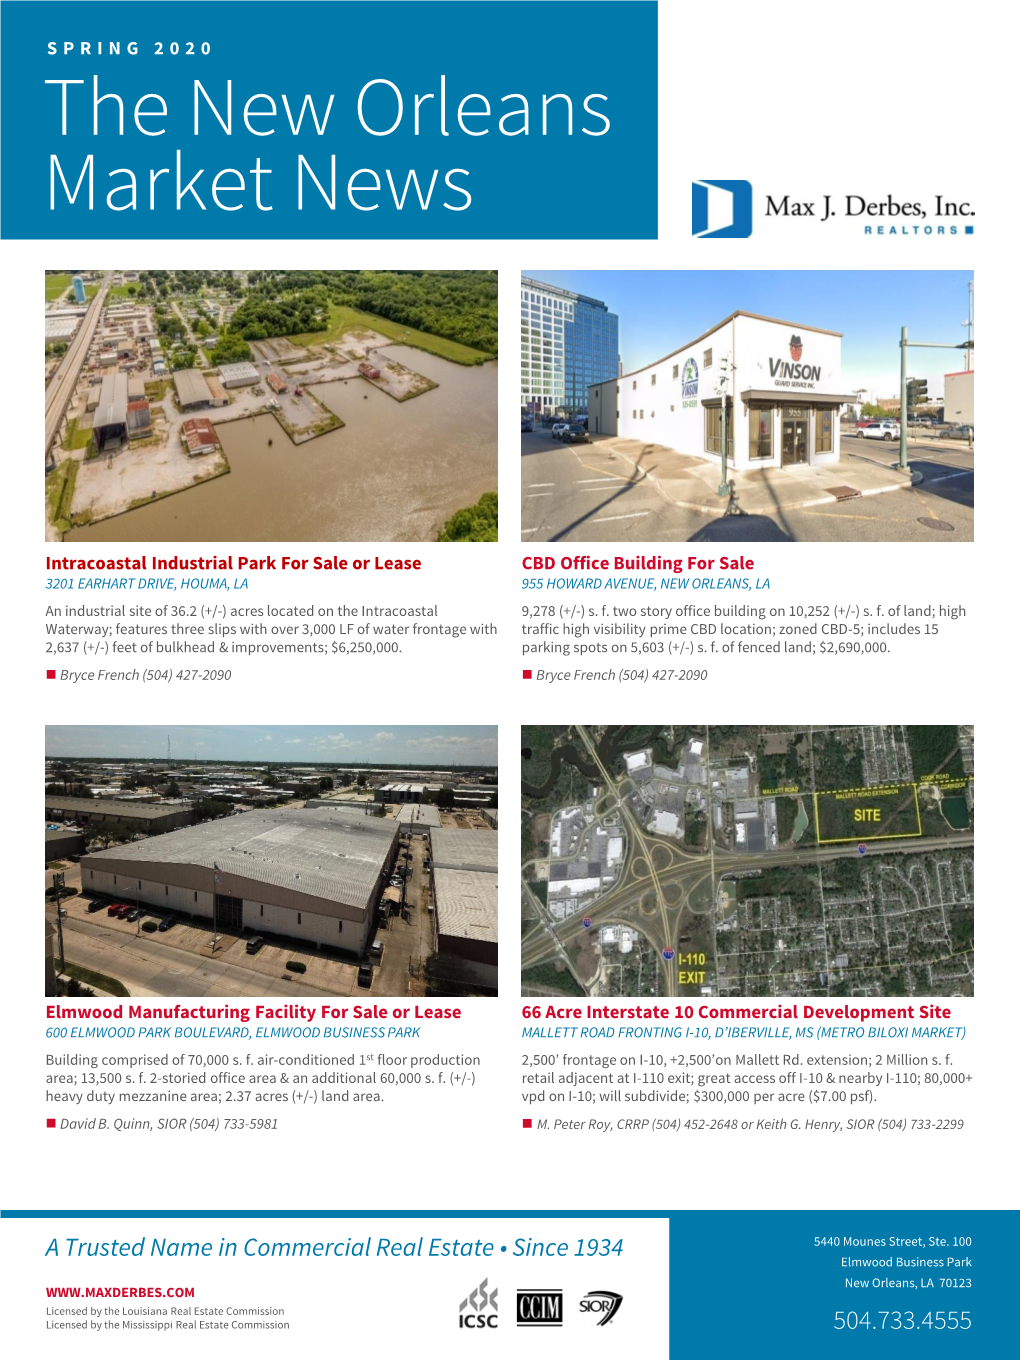 The New Orleans Market News